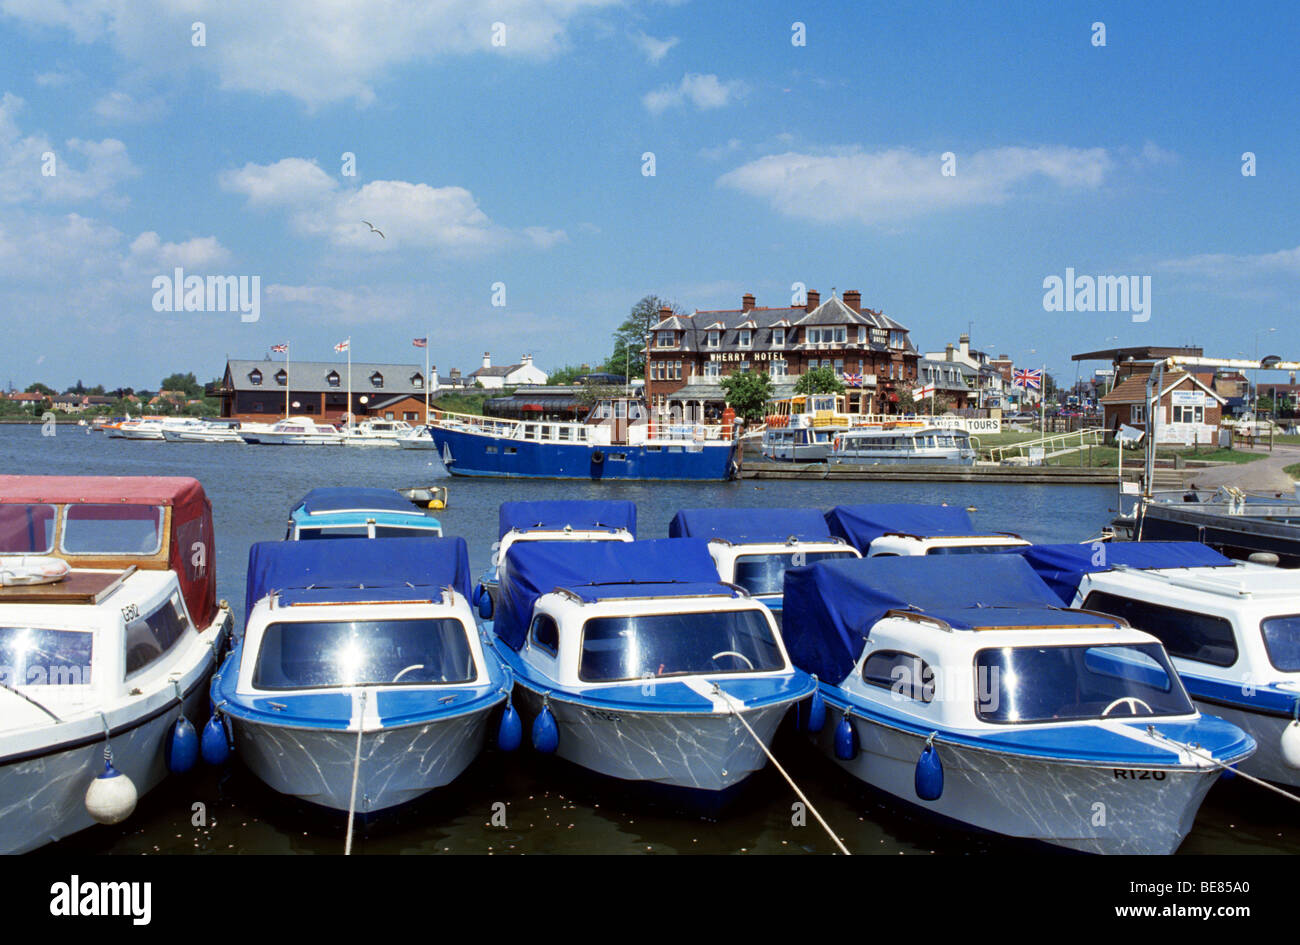 The popular boating centre of Oulton Broad, part of the Norkolk Broads, on the outskirts of Lowestoft on the Suffolk coast Stock Photo